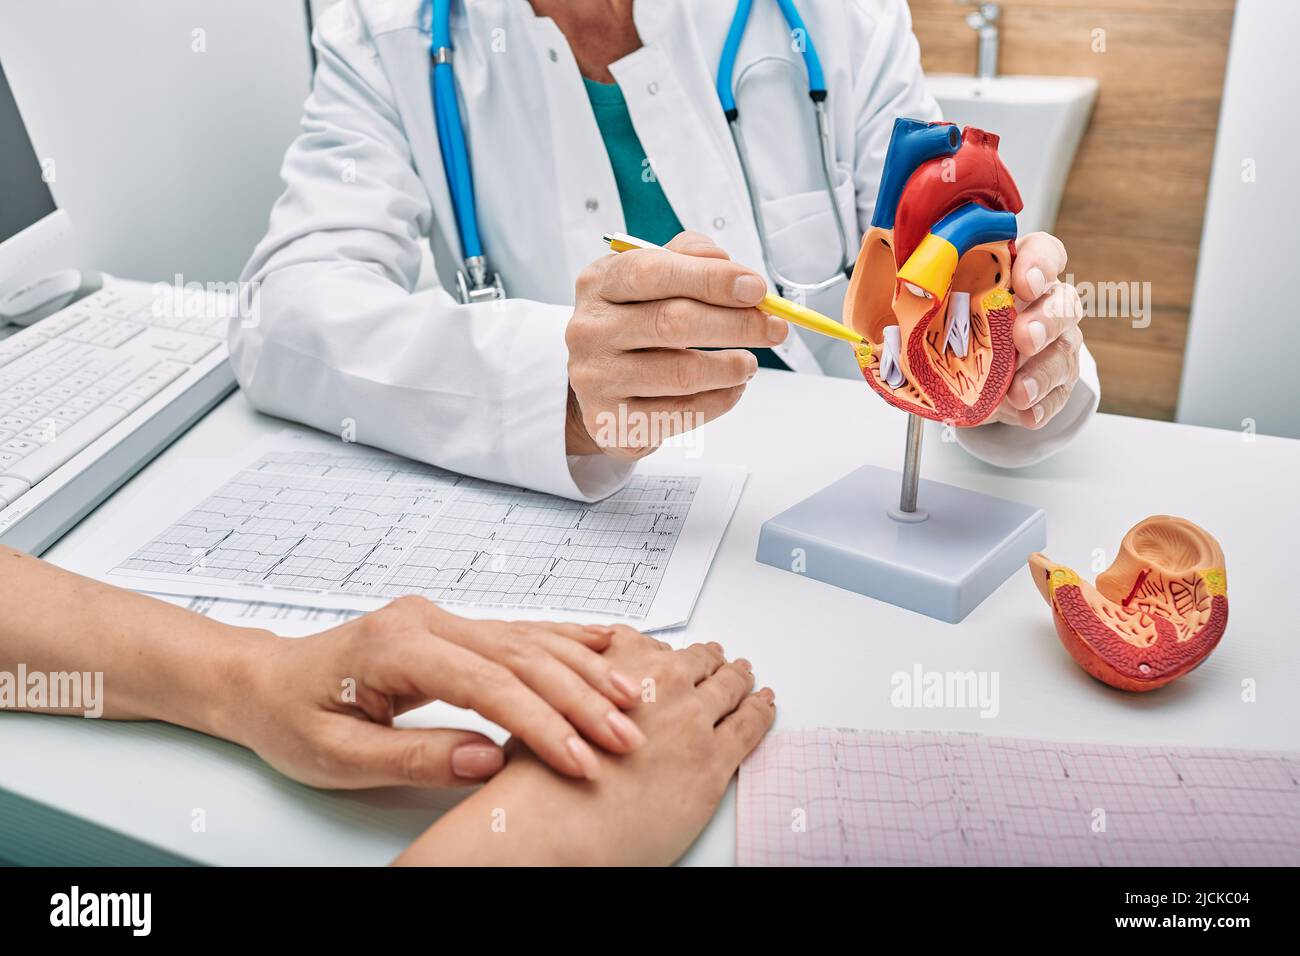 Cardiology consultation, treatment of heart disease. Doctor cardiologist while consultation showing anatomical model of human heart Stock Photo